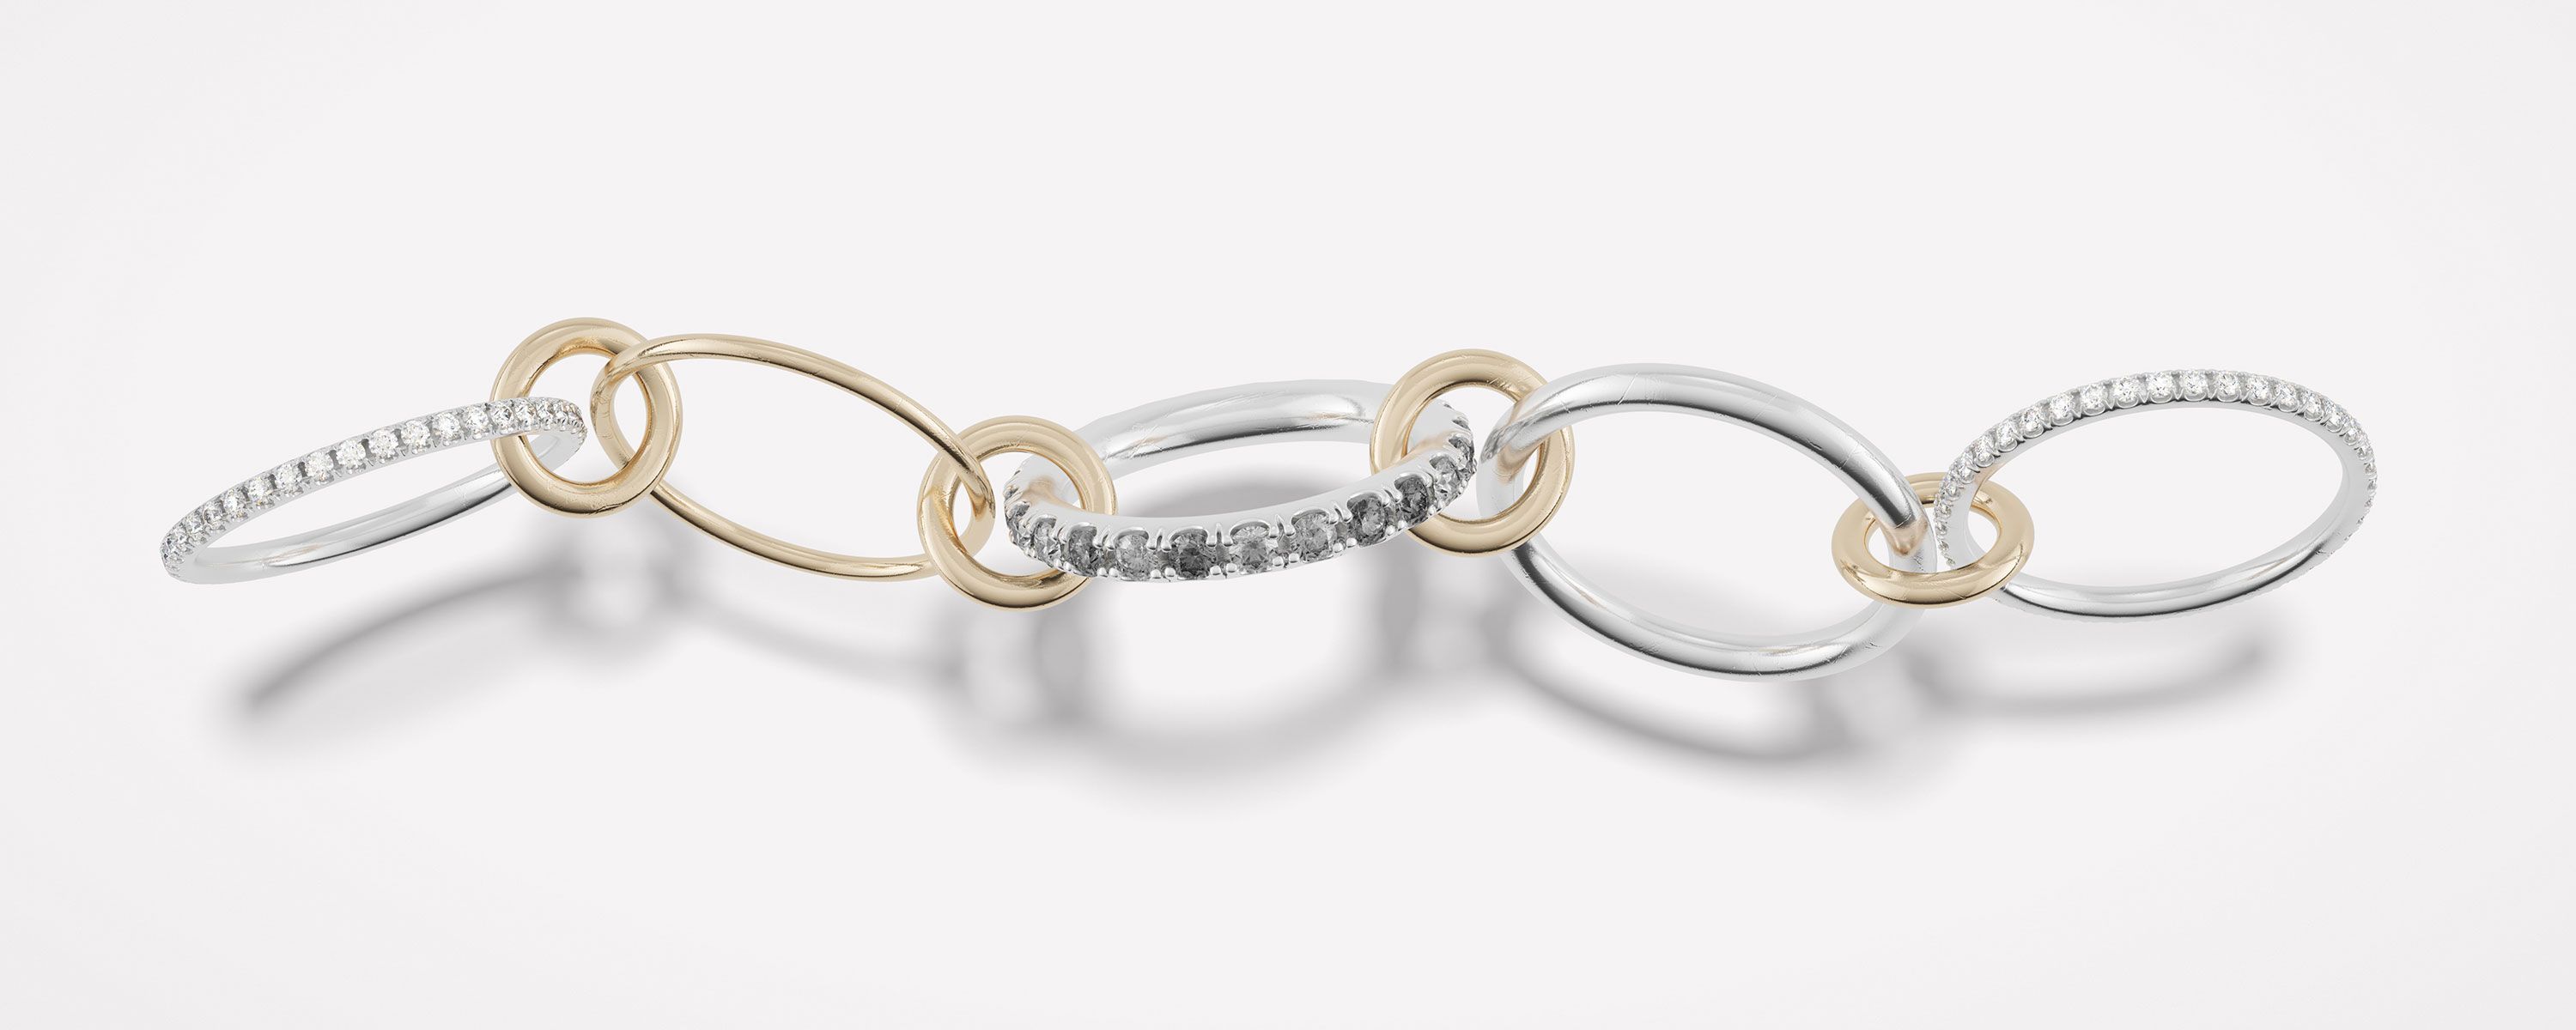 Spinelli Kilcollin image of the Aquarius linked ring spread across a white background with light shadow